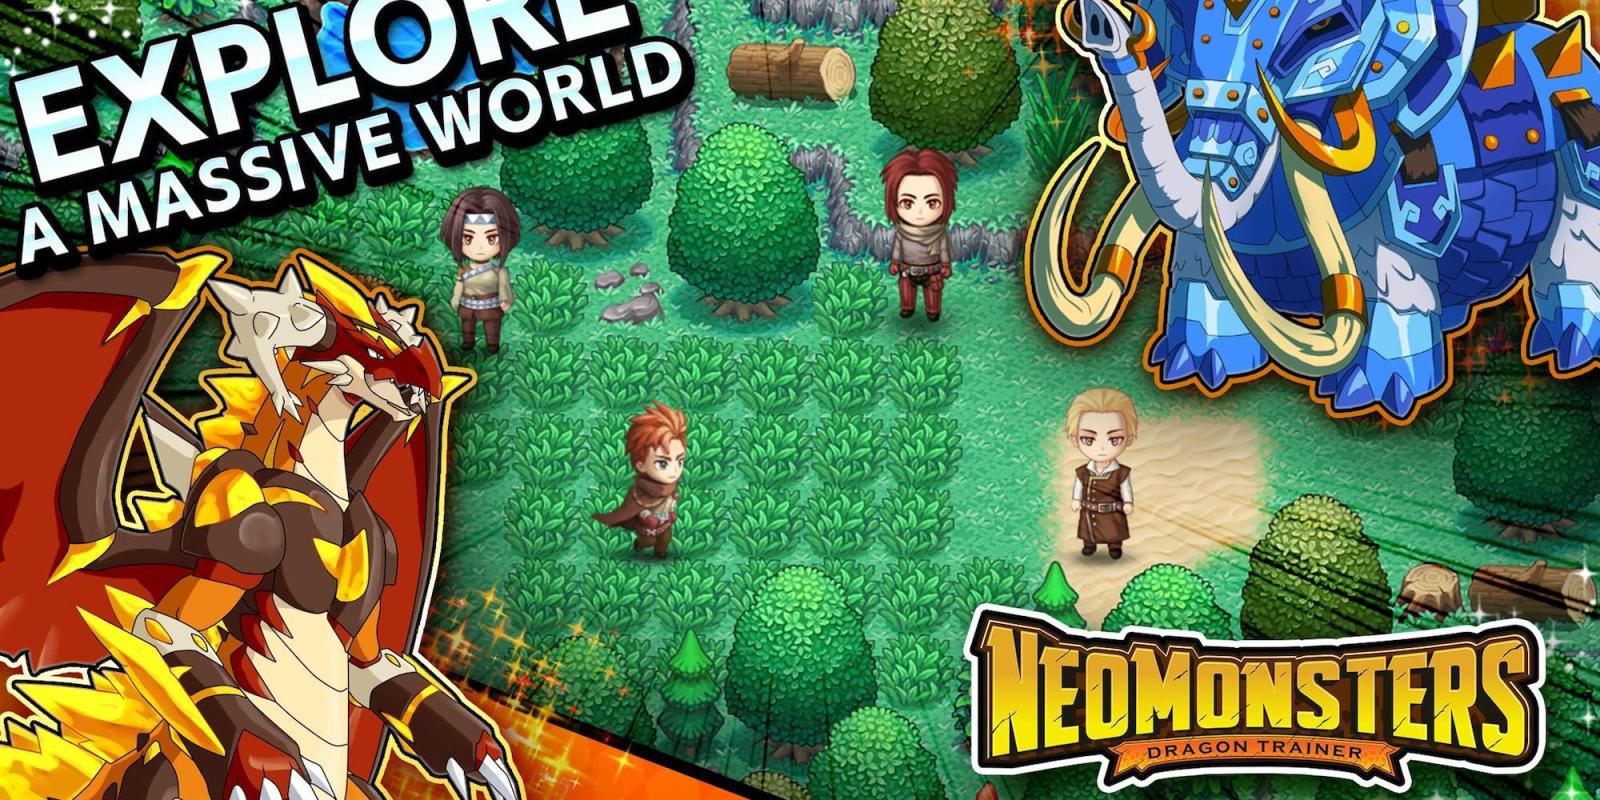 Today’s best Android game/app deals and freebies: Neo Monsters, Majesty